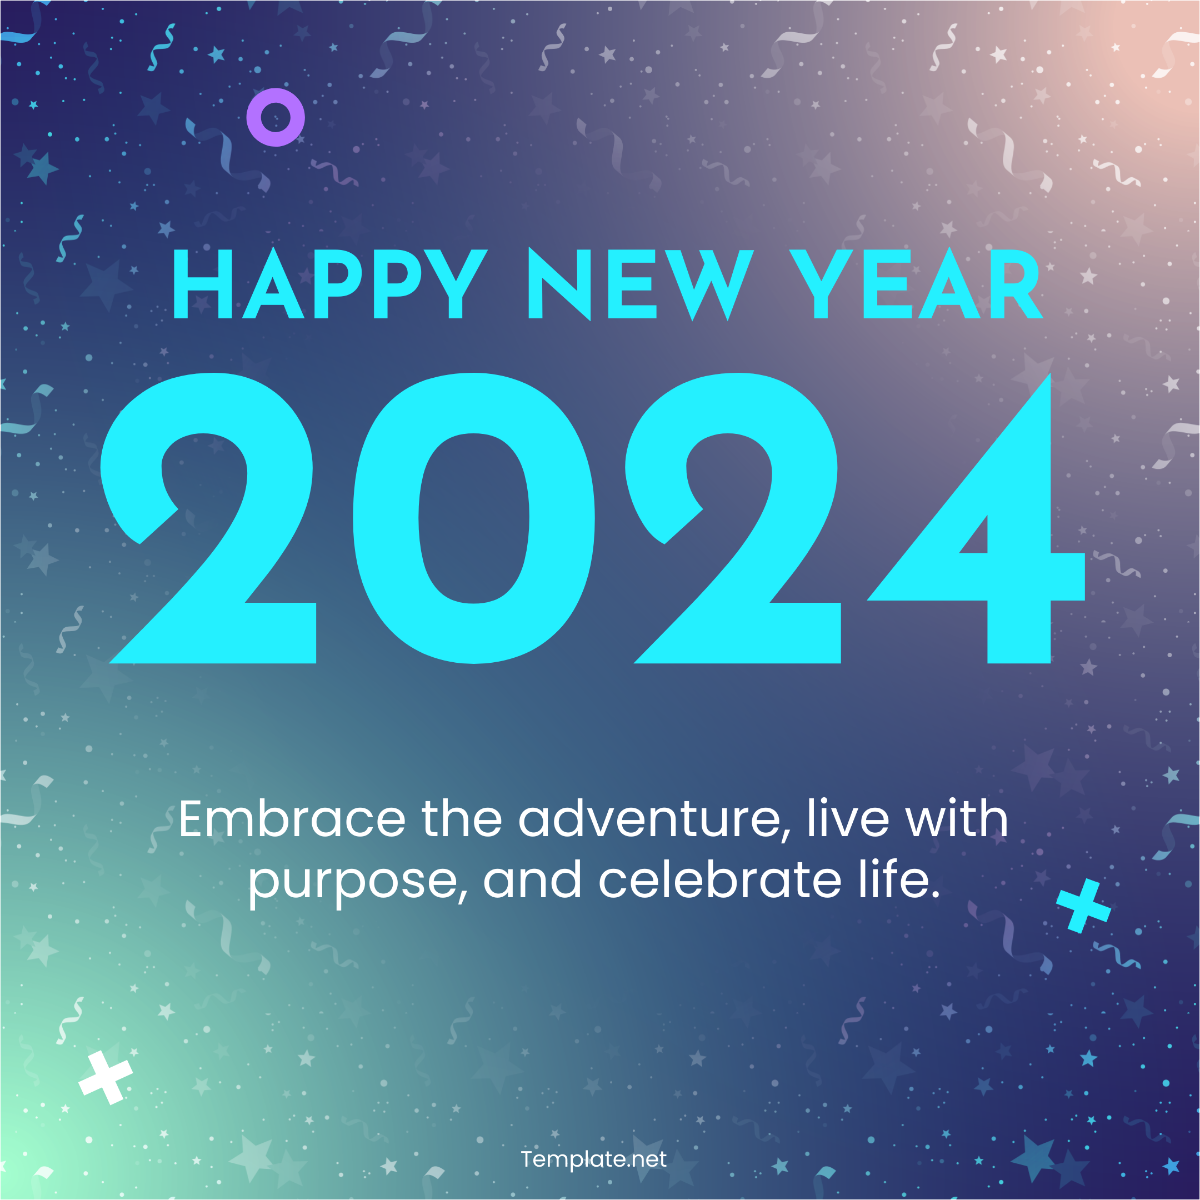 Free New Year 2024 Instagram Post Template